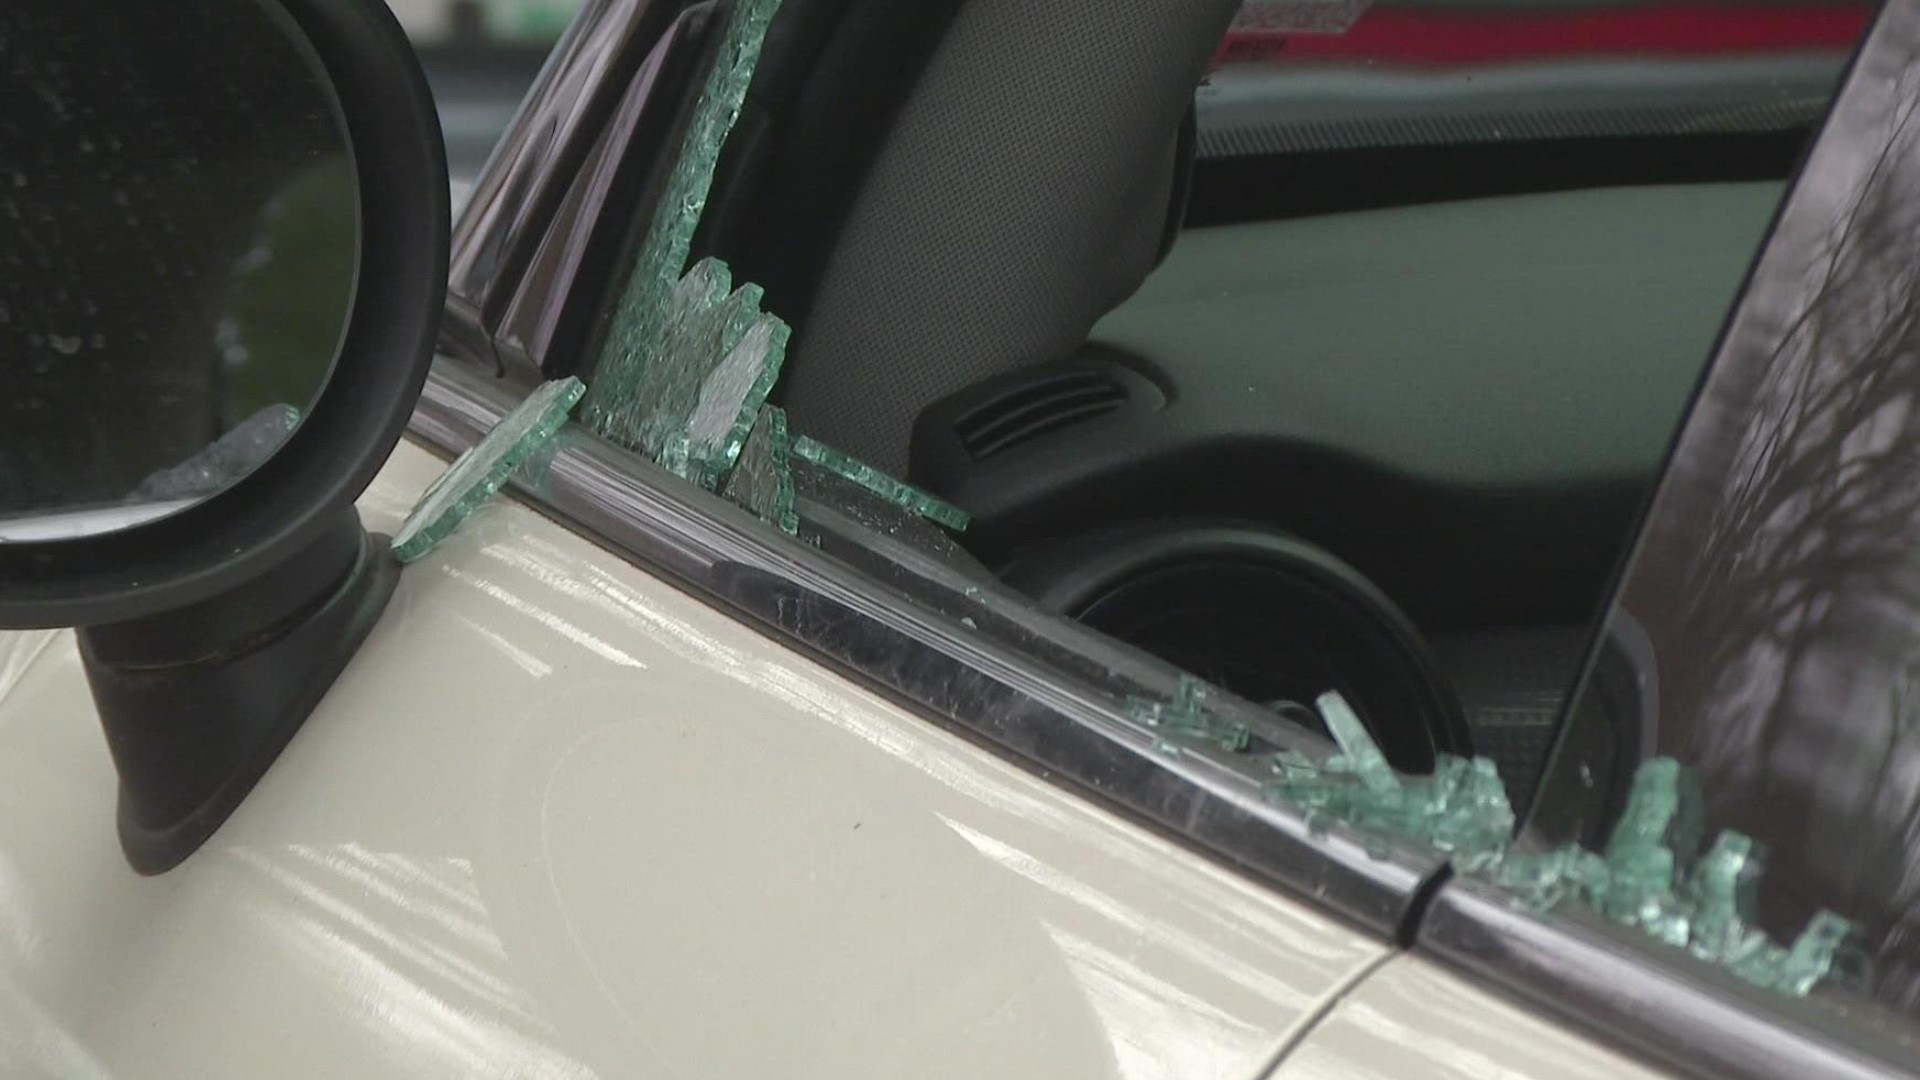 In Virginia Highland 11Alive found smashed car windows and broken glass on at least seven different streets.